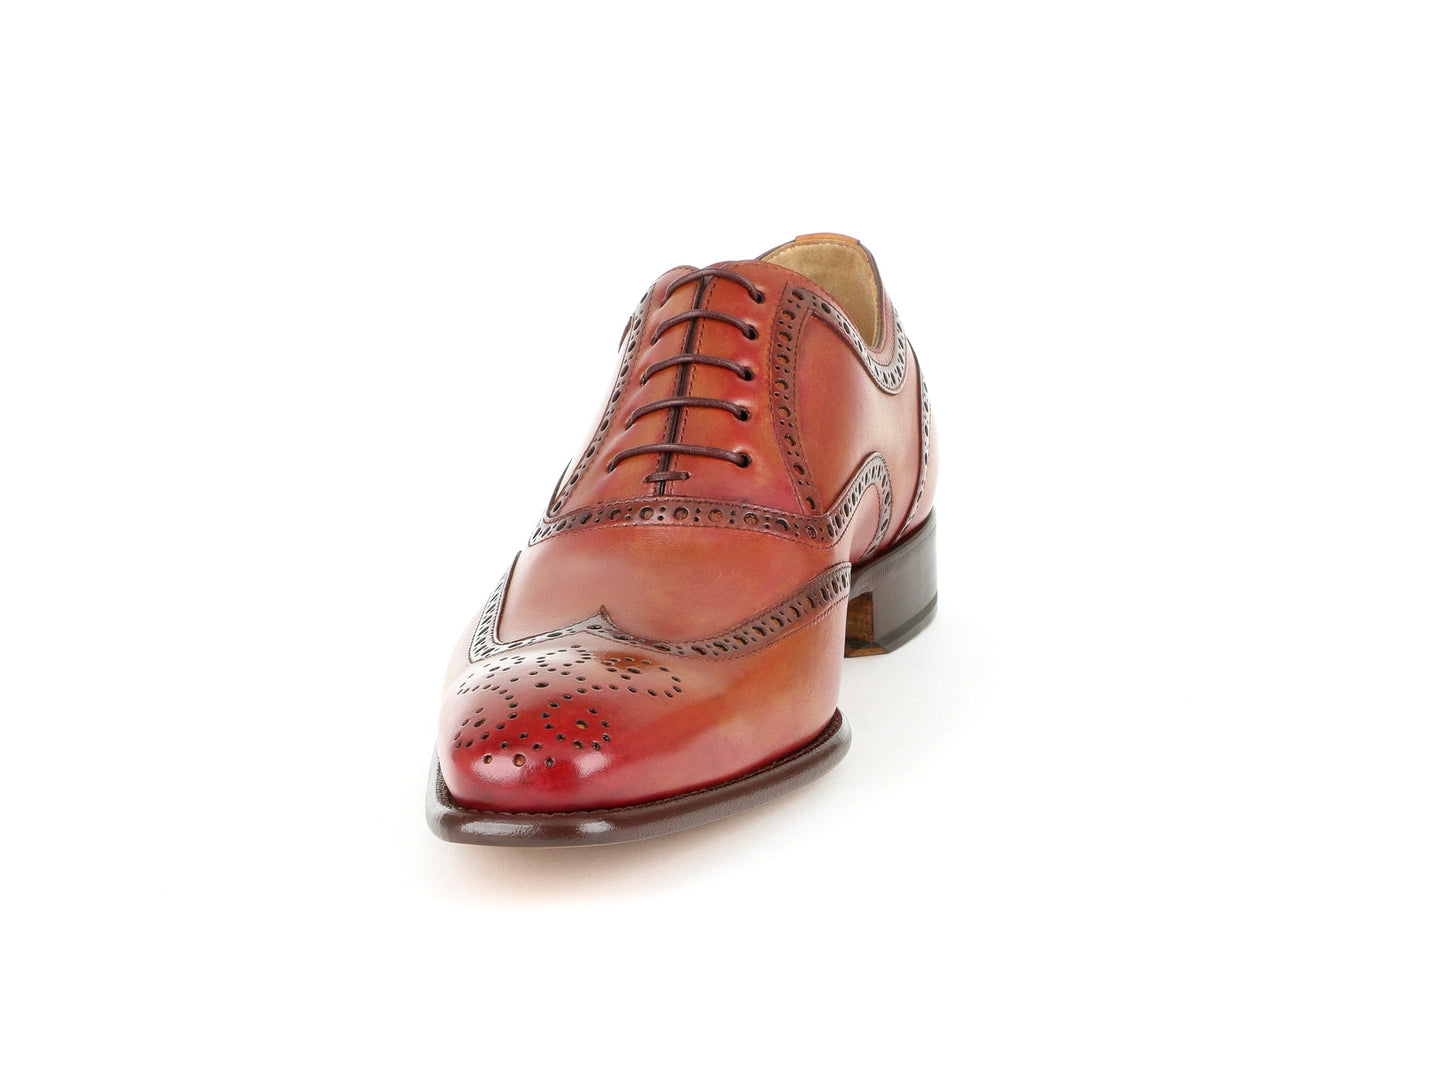 FEDERICO - Iron red Leather Oxford